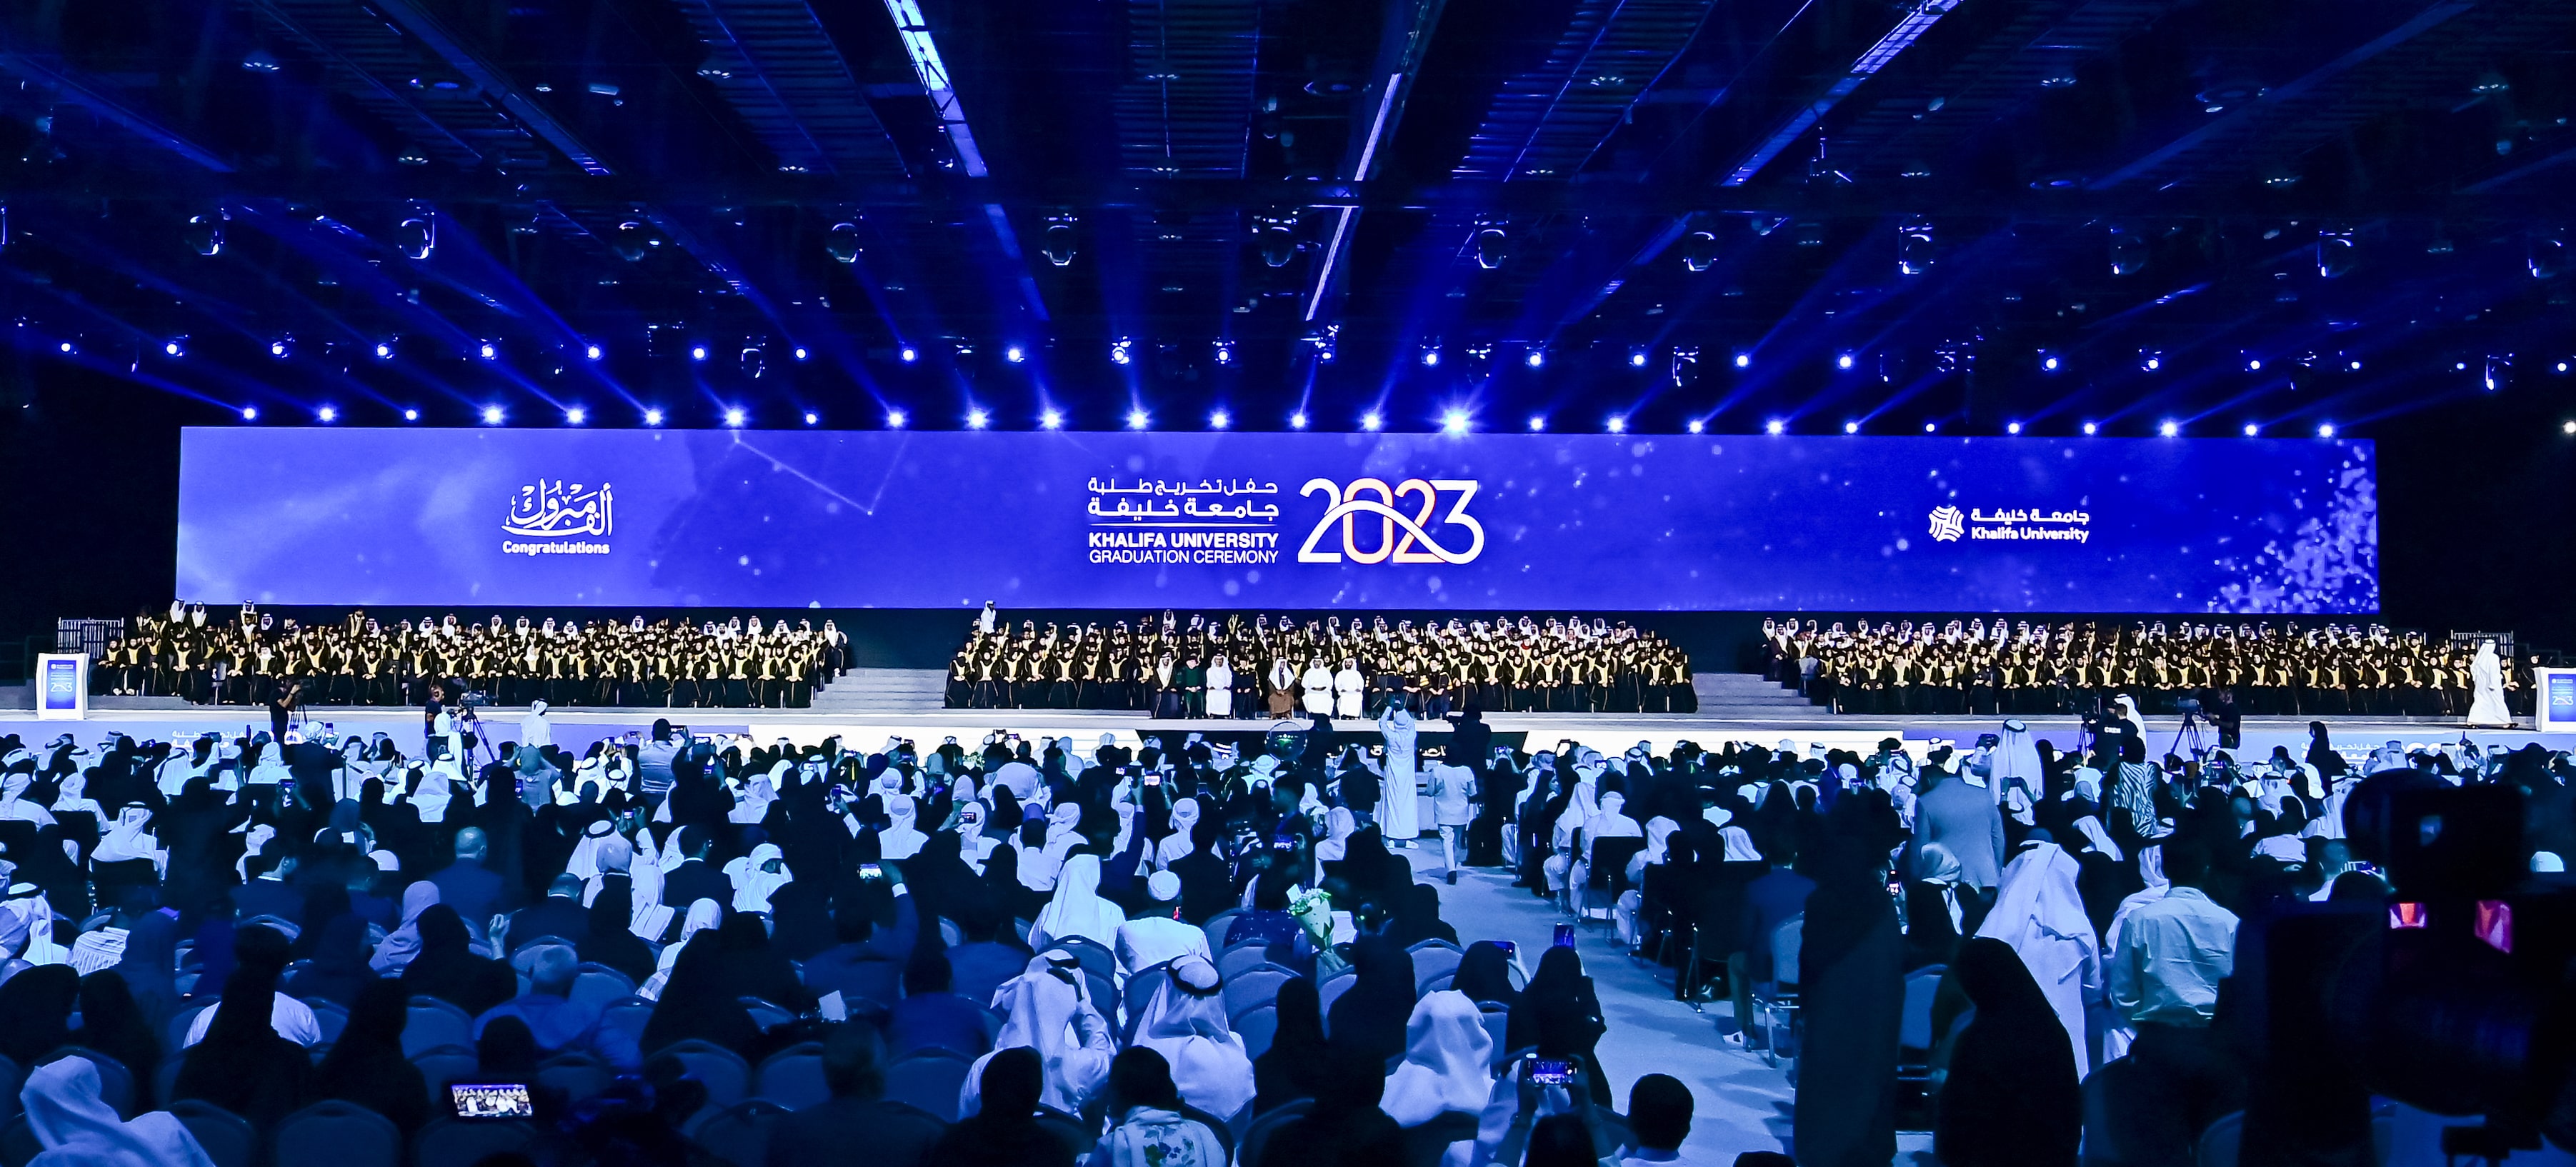 549 Bachelor, Master’s and PhD Students Conferred Degrees by H.E. Sheikh Nahyan bin Mubarak